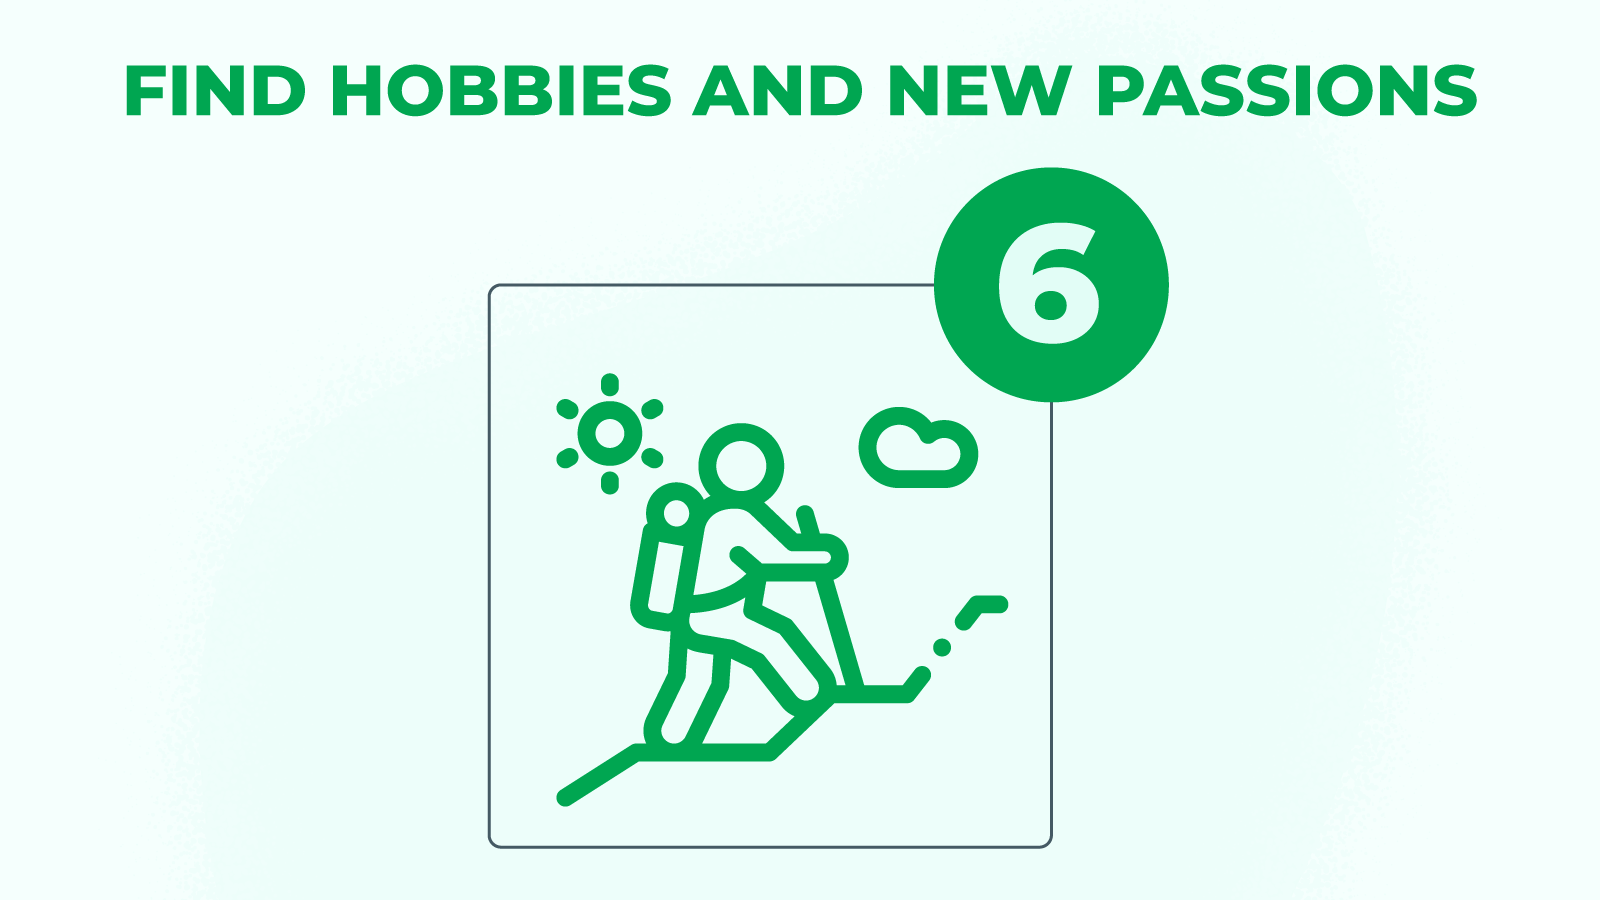 6.Find hobbies and new passions - stop gambling addiction